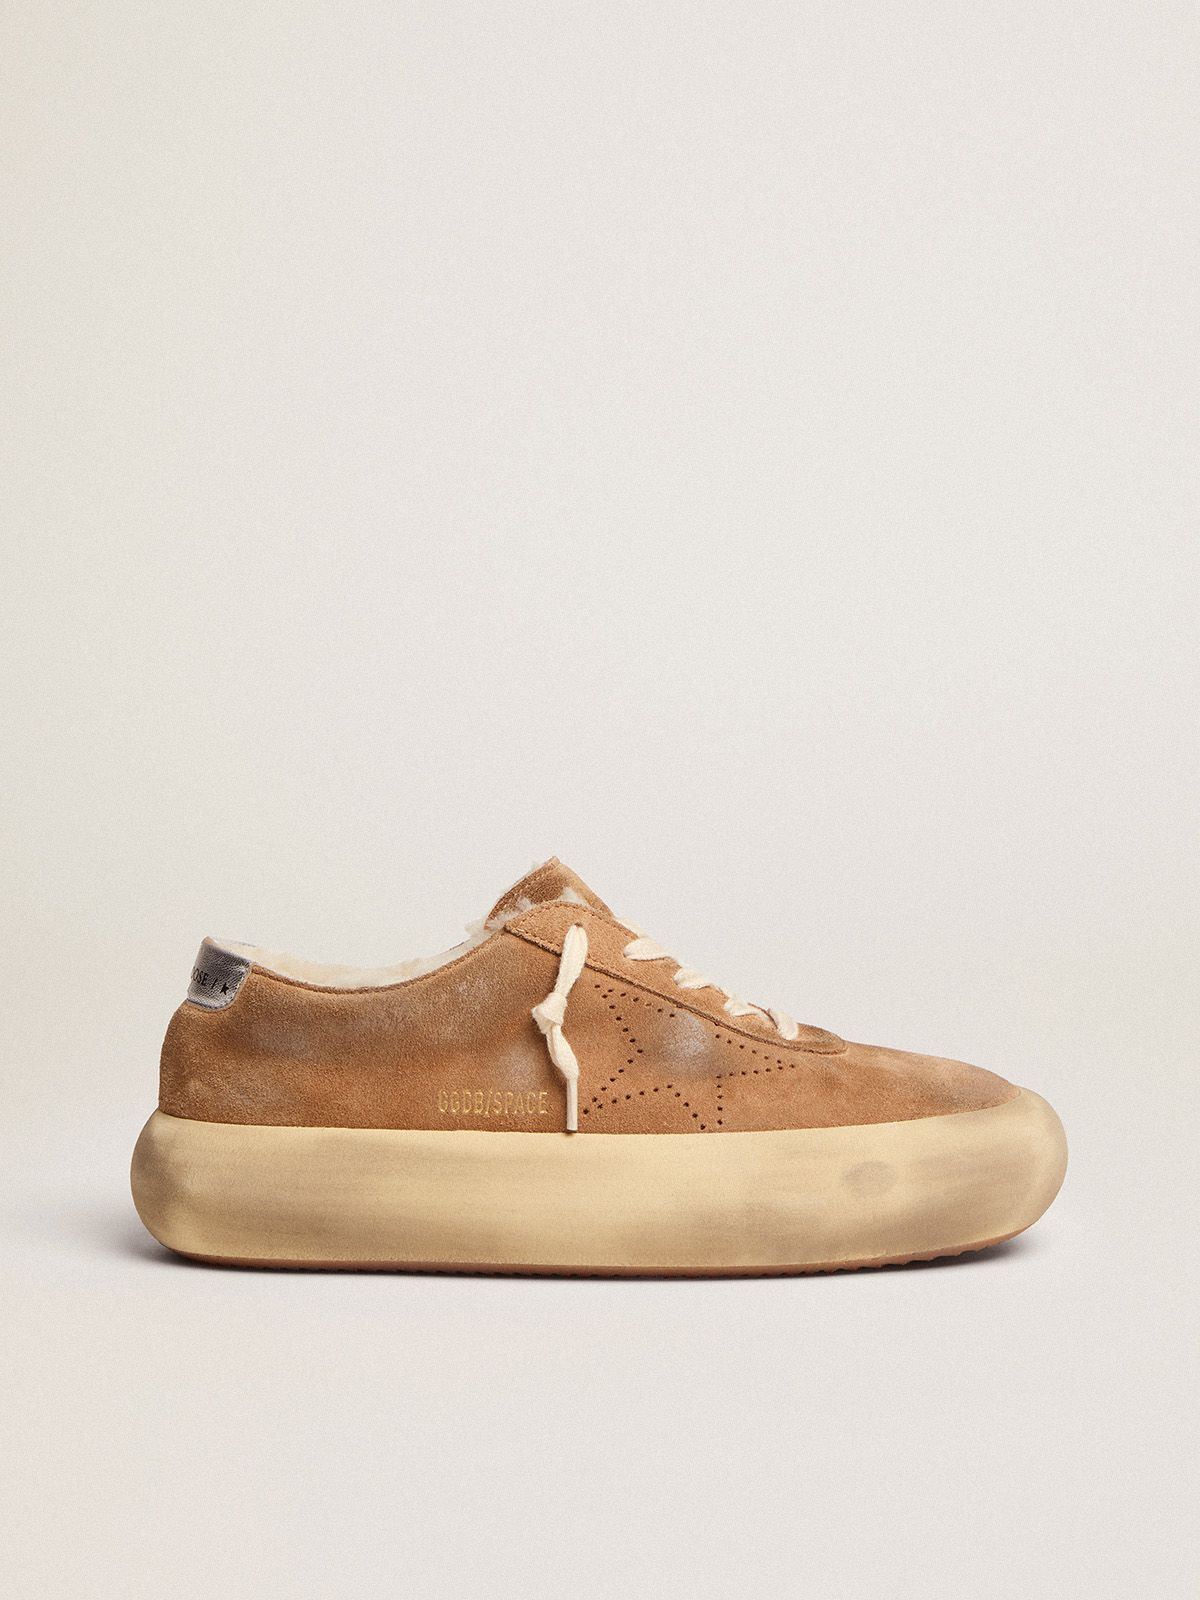 golden goose with shearling tobacco-colored suede lining Space-Star shoes in